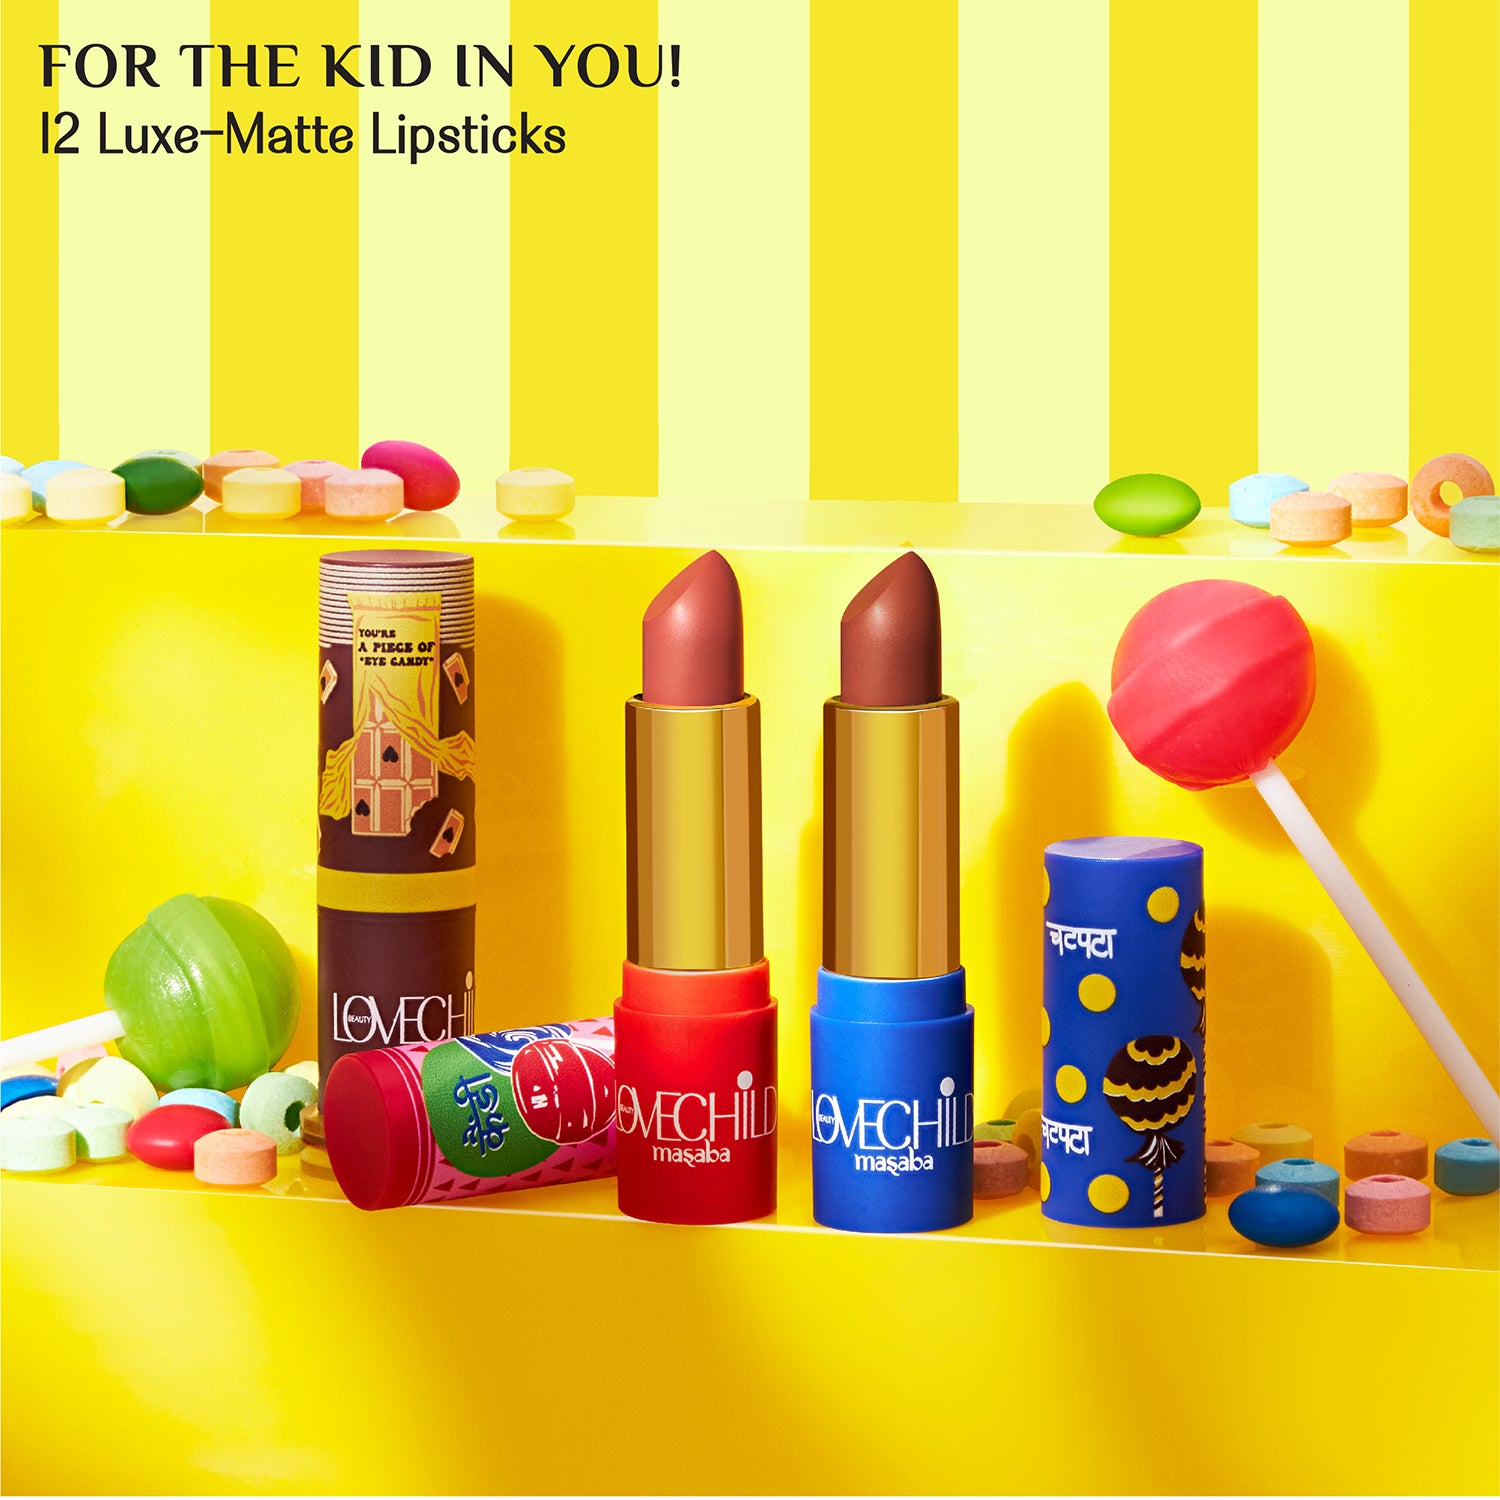 LoveChild Masaba - For the Kid in You! - 11 Barfee - Luxe Matte Lipstick